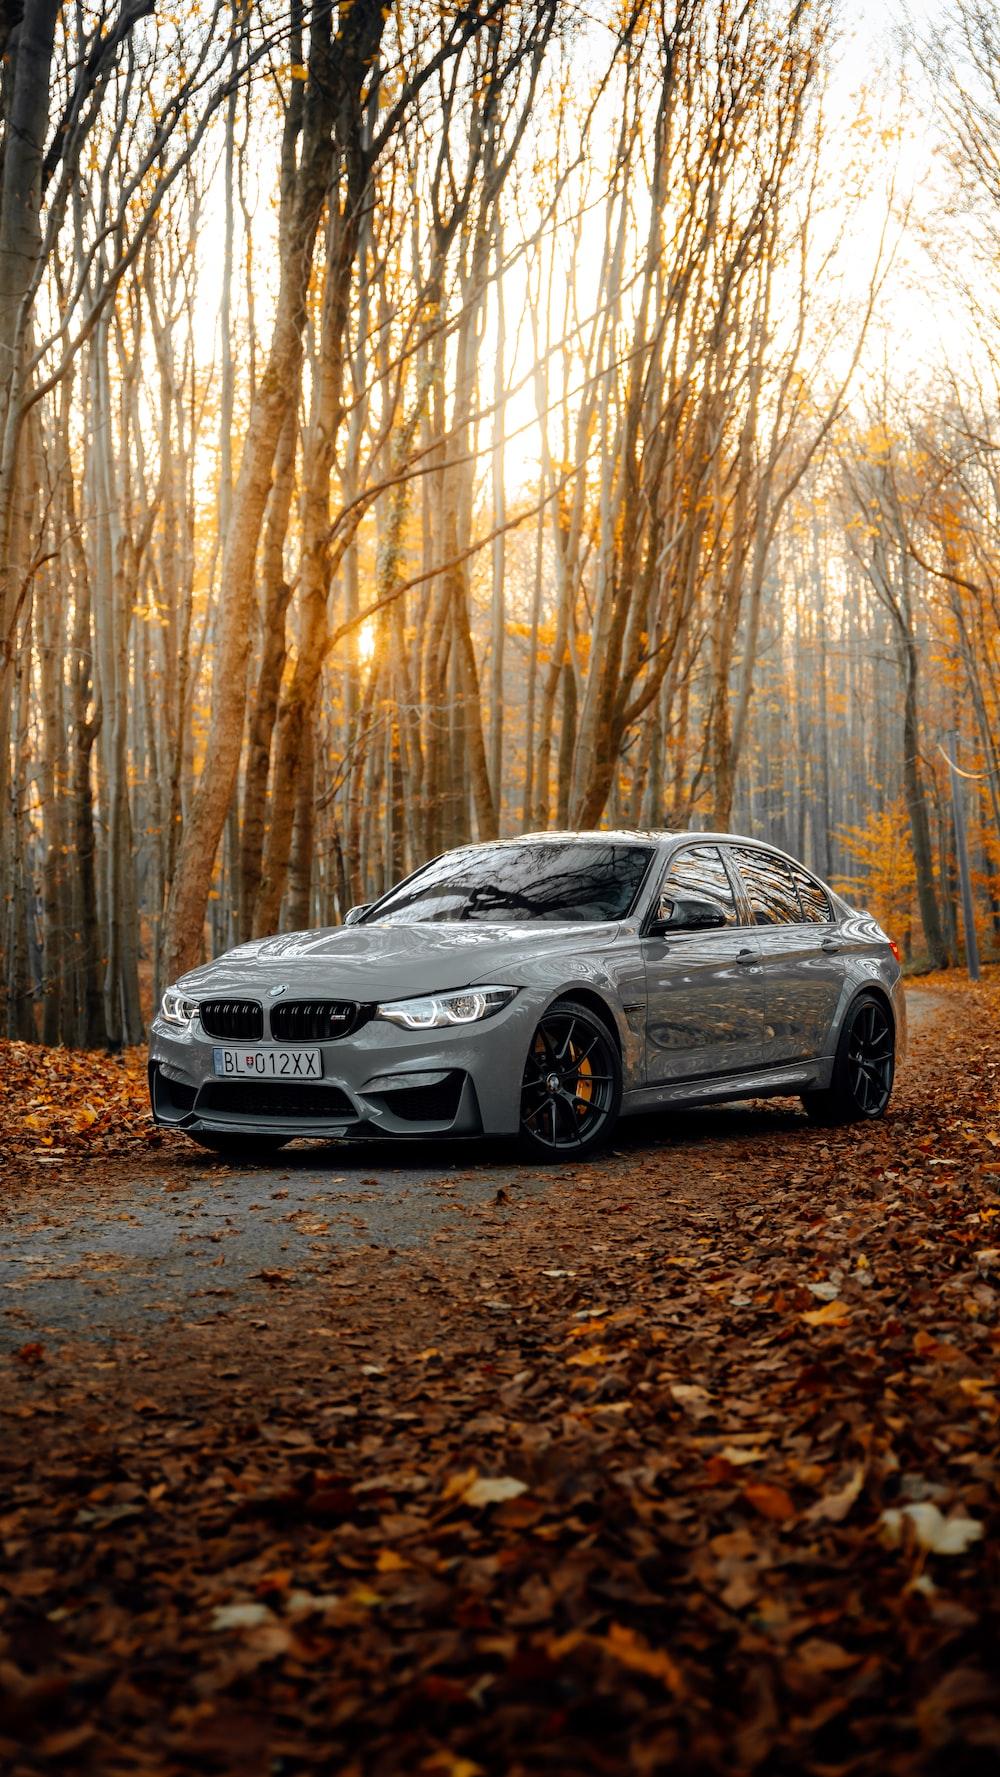 Bmw M3 Pictures Image Stock Photos